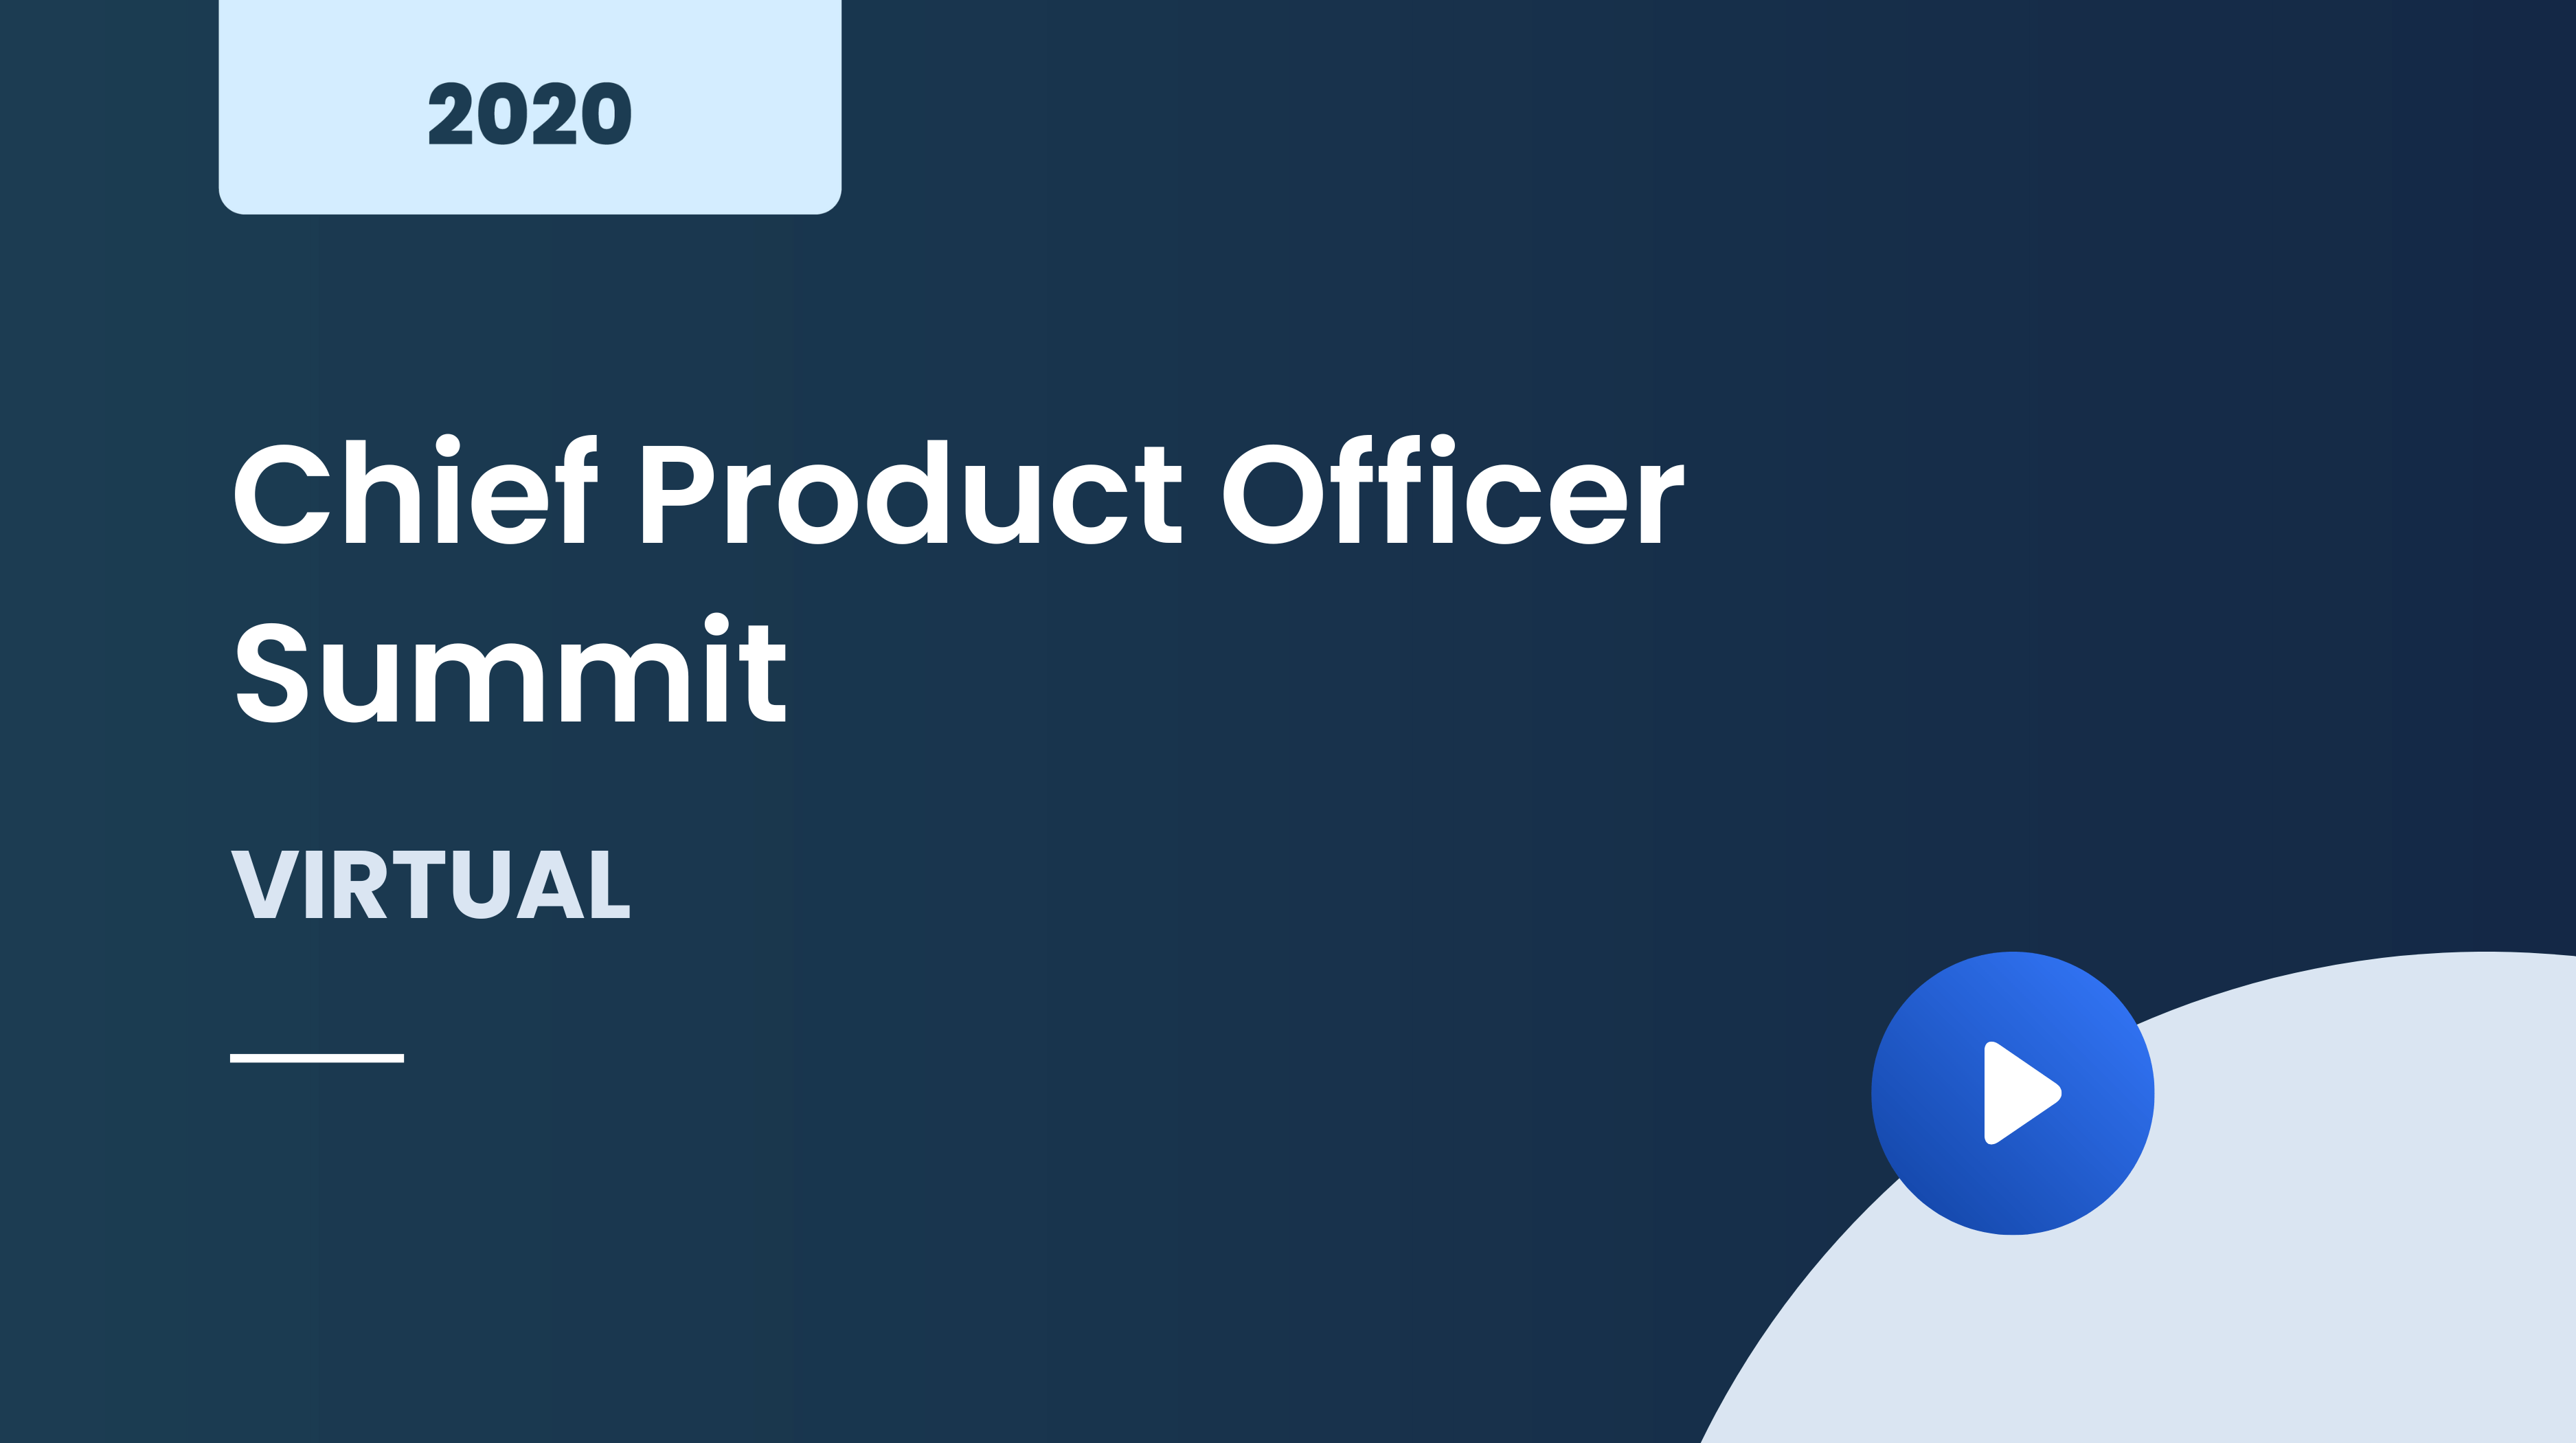 Chief Product Officer Summit December 2020